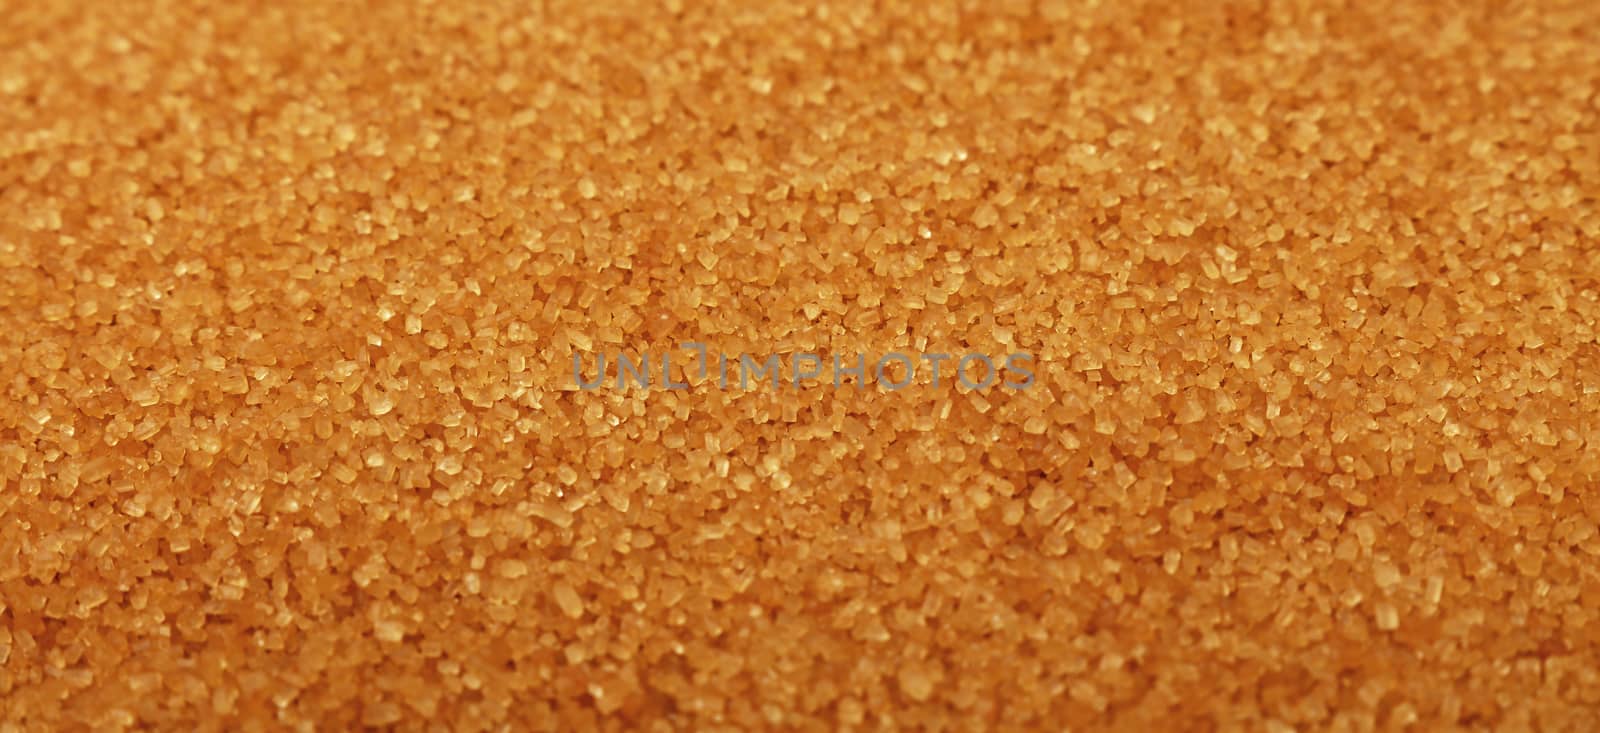 Close up background of brown cane sugar by BreakingTheWalls